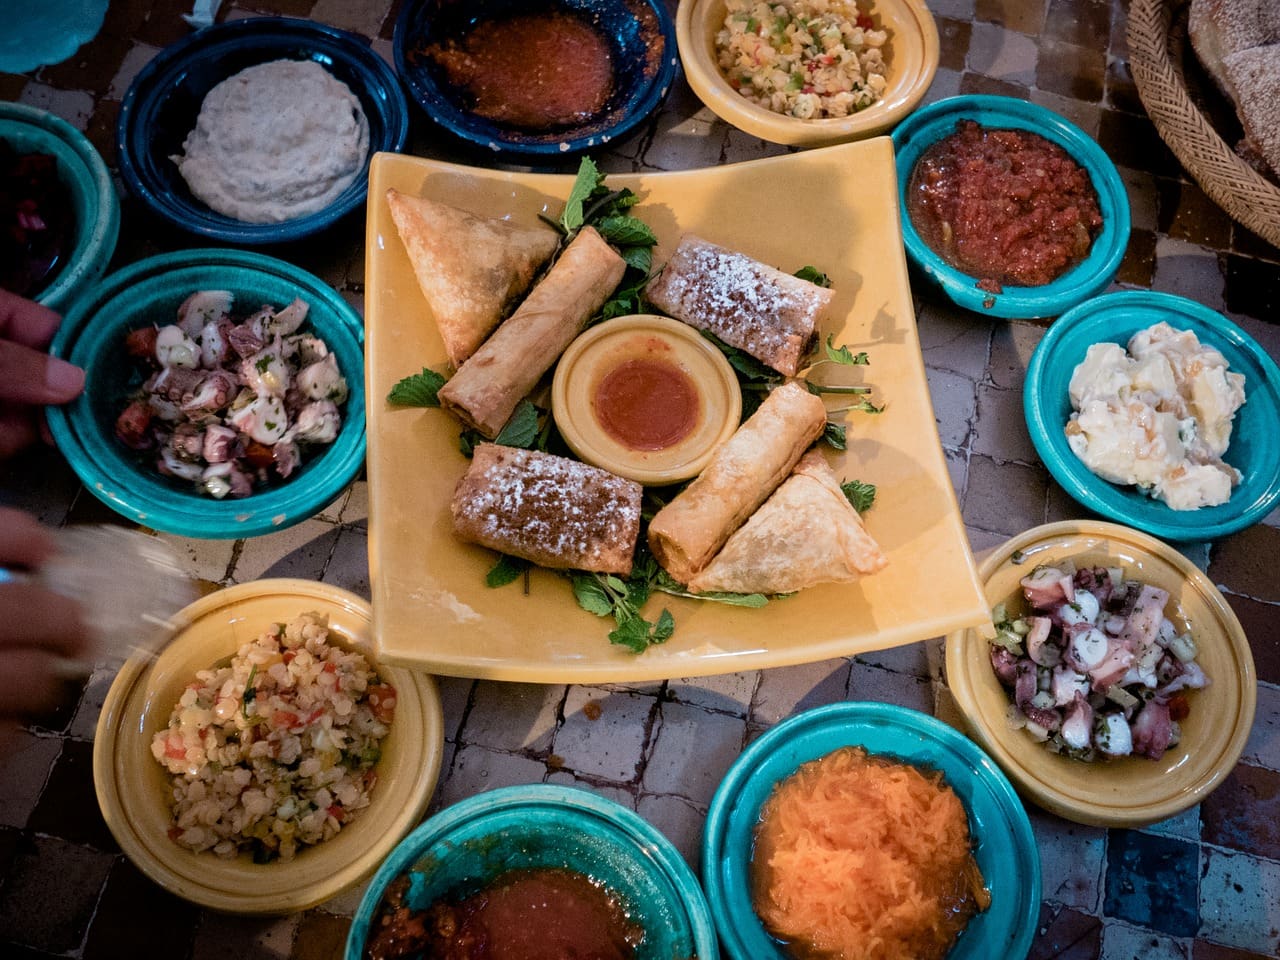 Food in Morocco - Why Travel to Africa